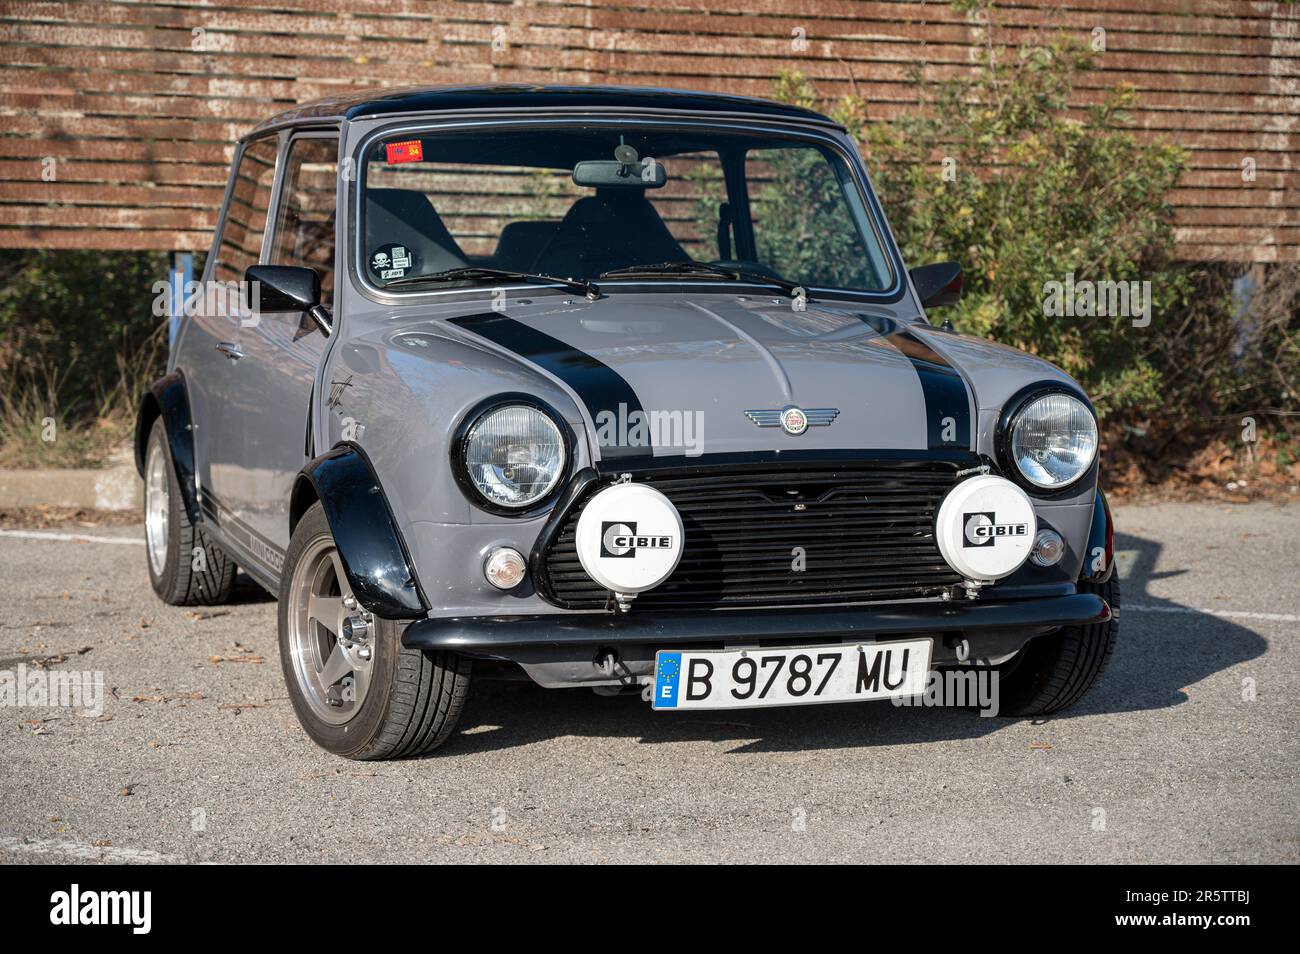 The front view of an old classic Mini Cooper in gray color on the street Stock Photo